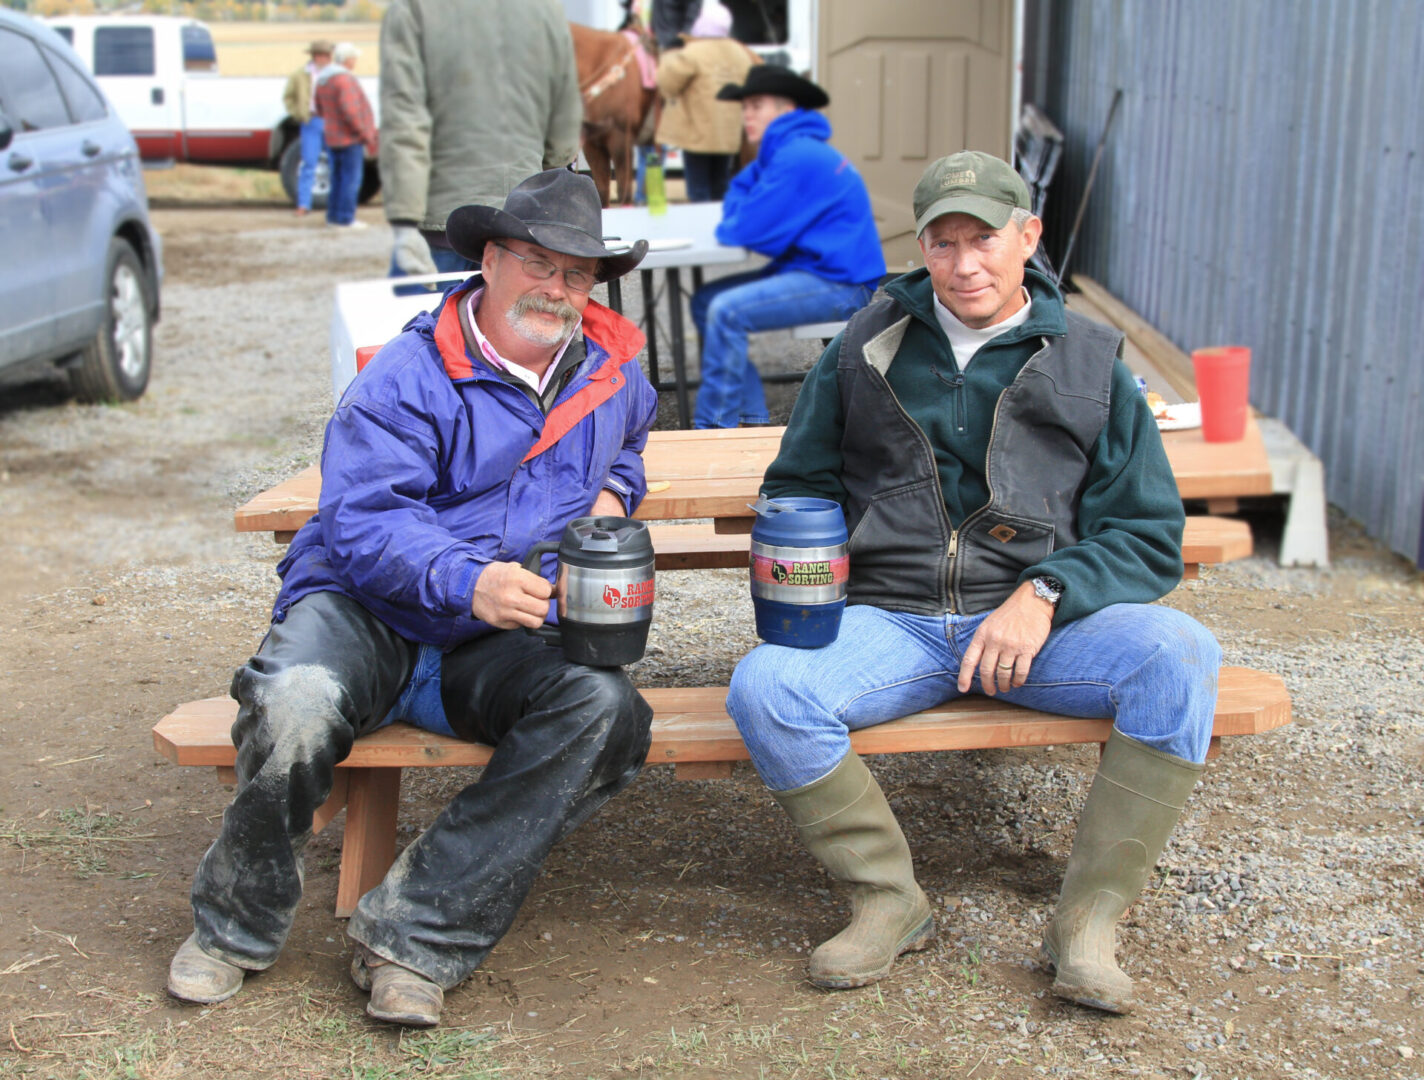 Two men sitting on a bench with cups of coffee.